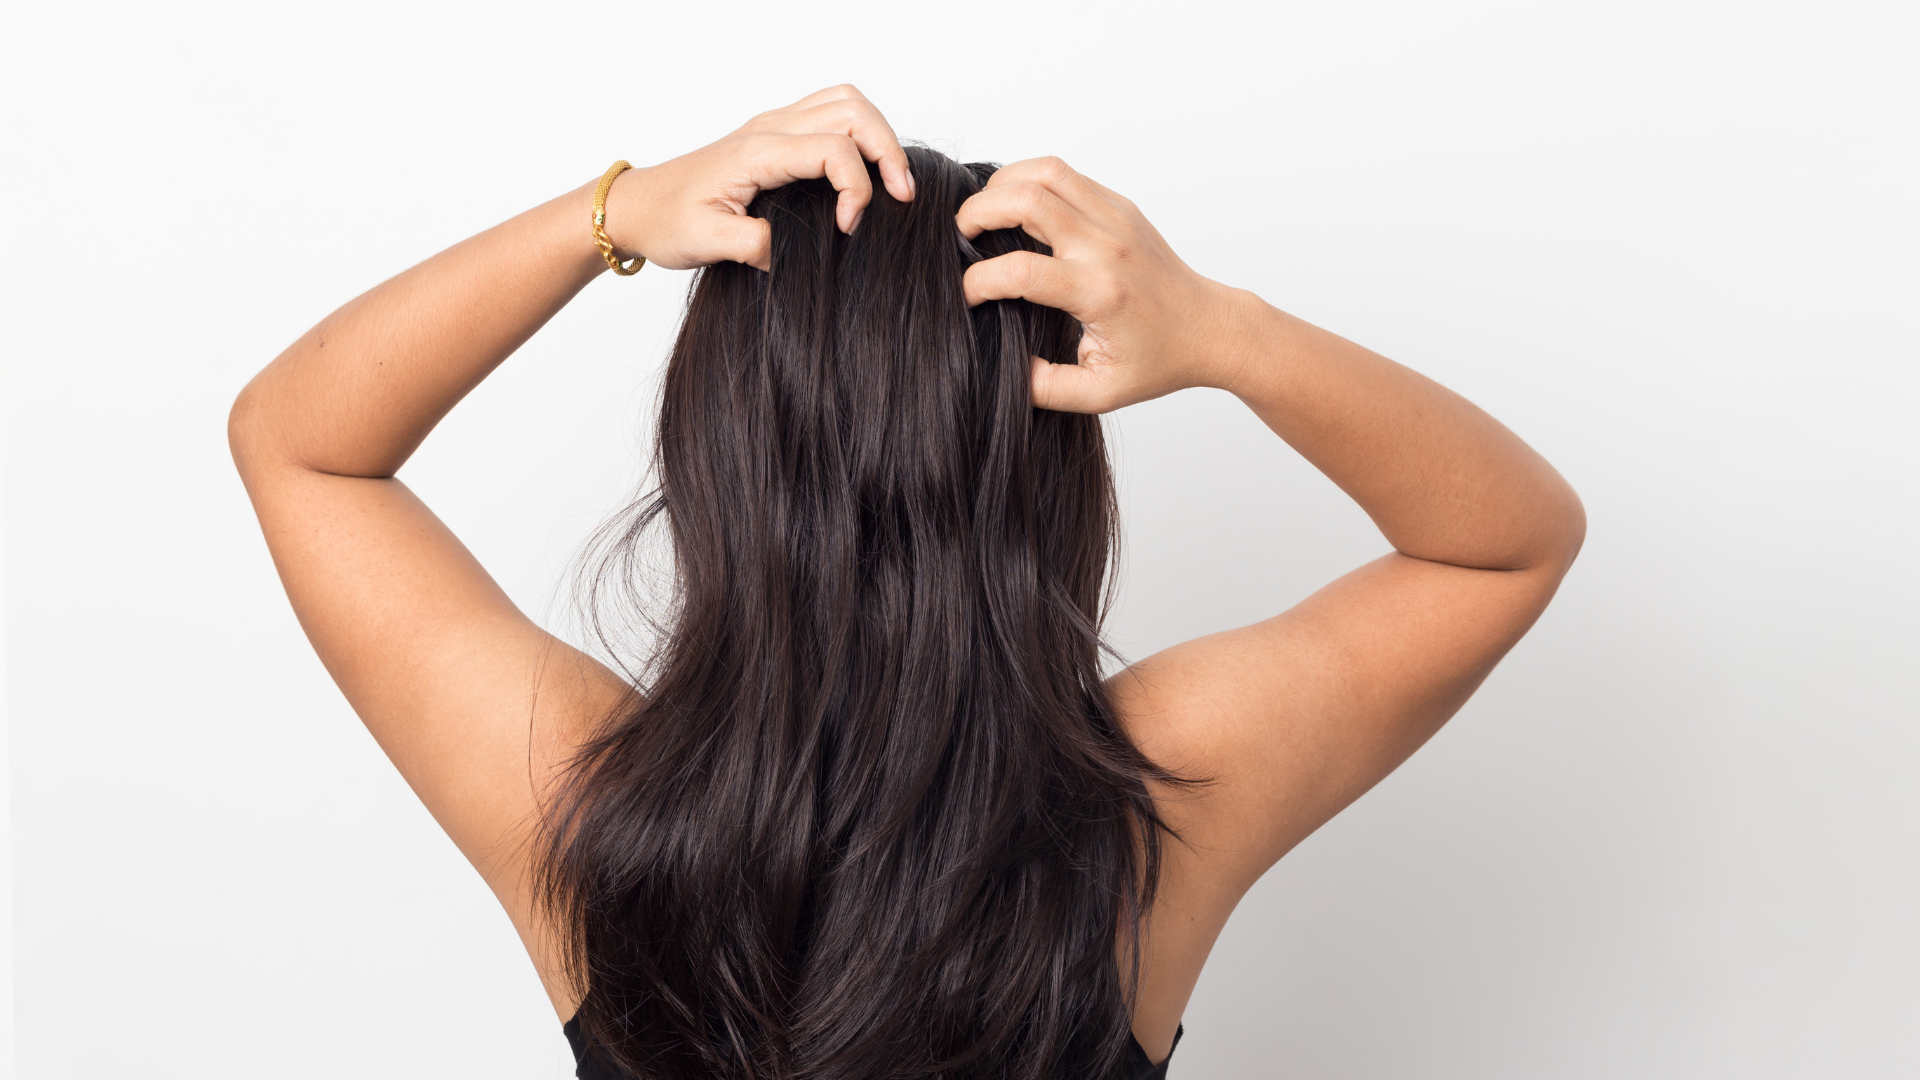 How to Oil Your Scalp with The Multi-Purpose Oil